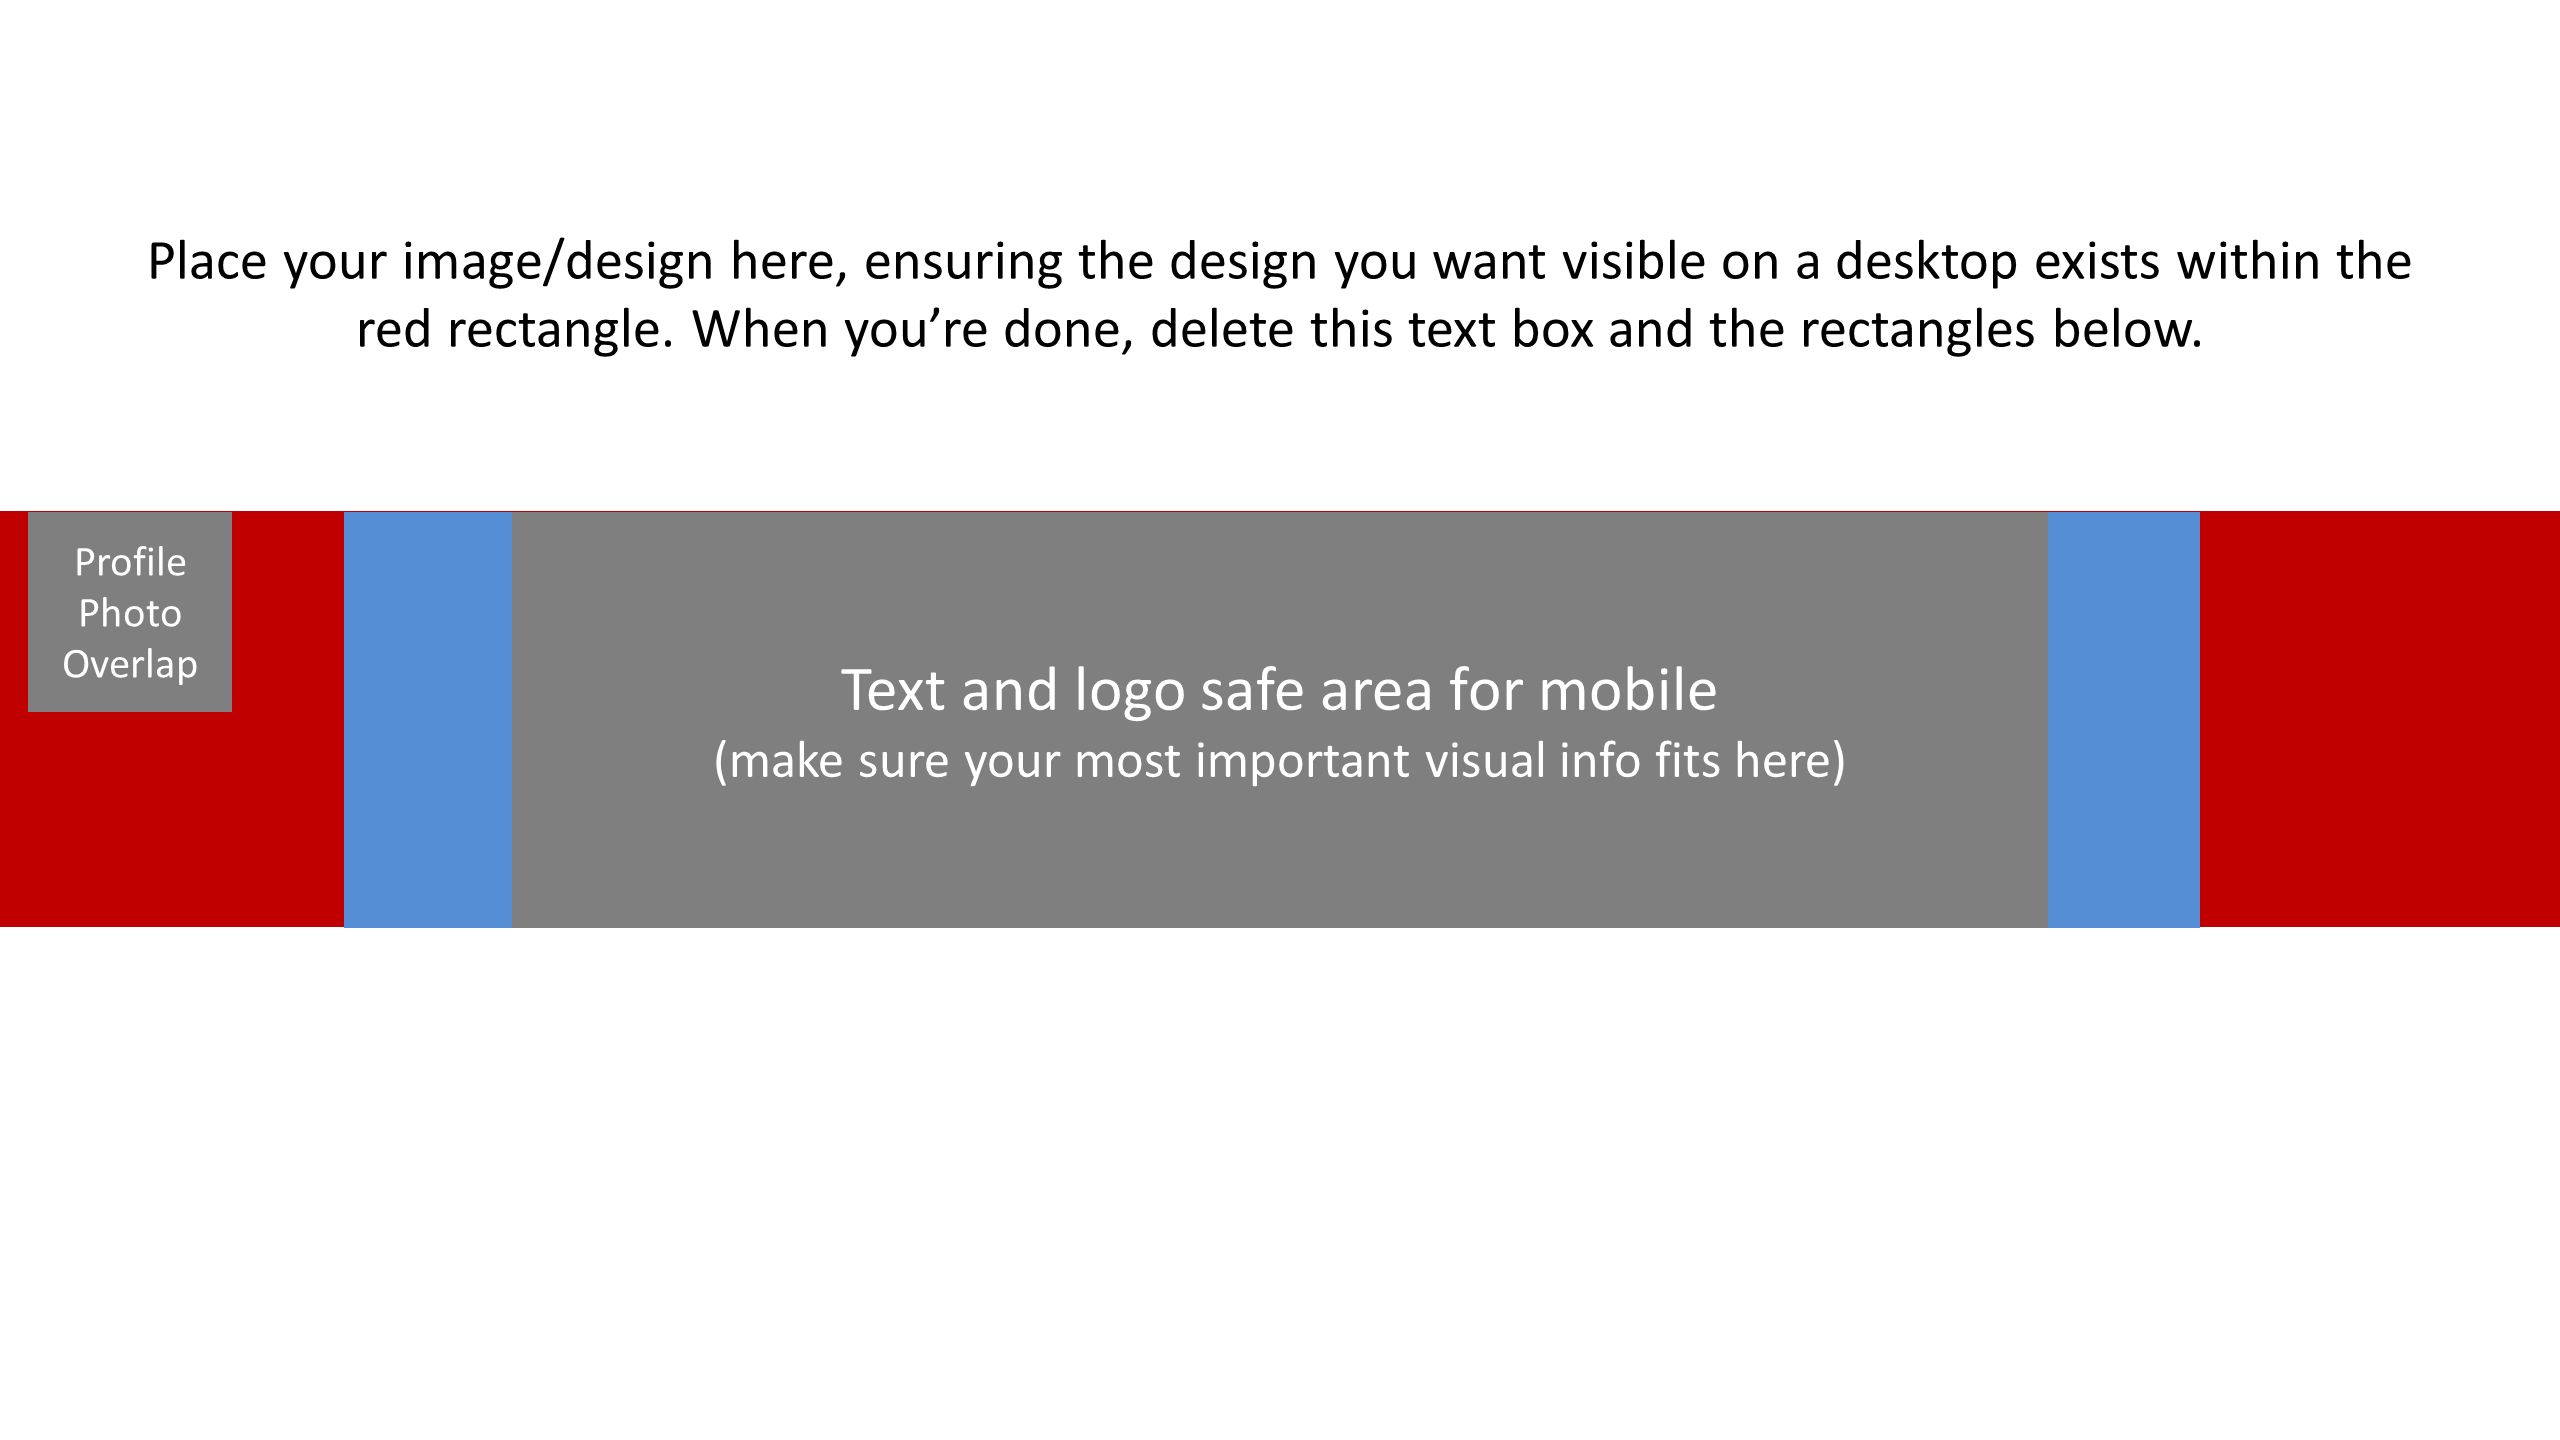 Text and logo safe area for mobile